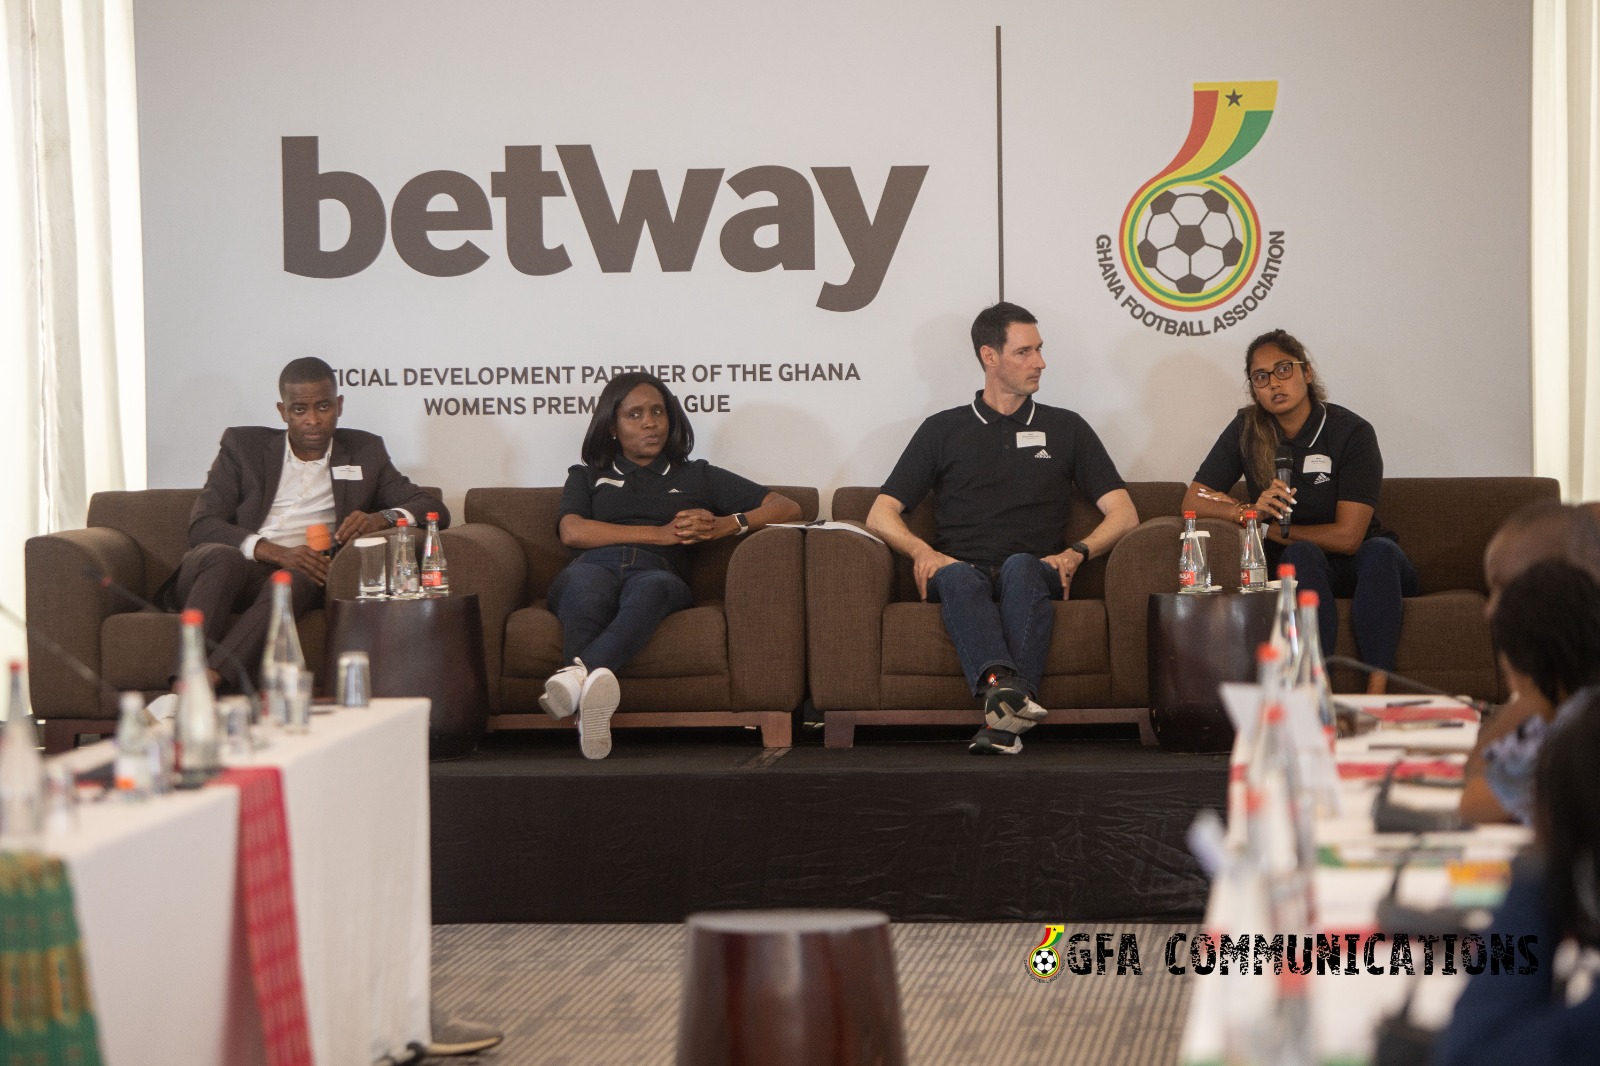 Final leg of betway leadership and development workshop for WPL clubs ends successfully